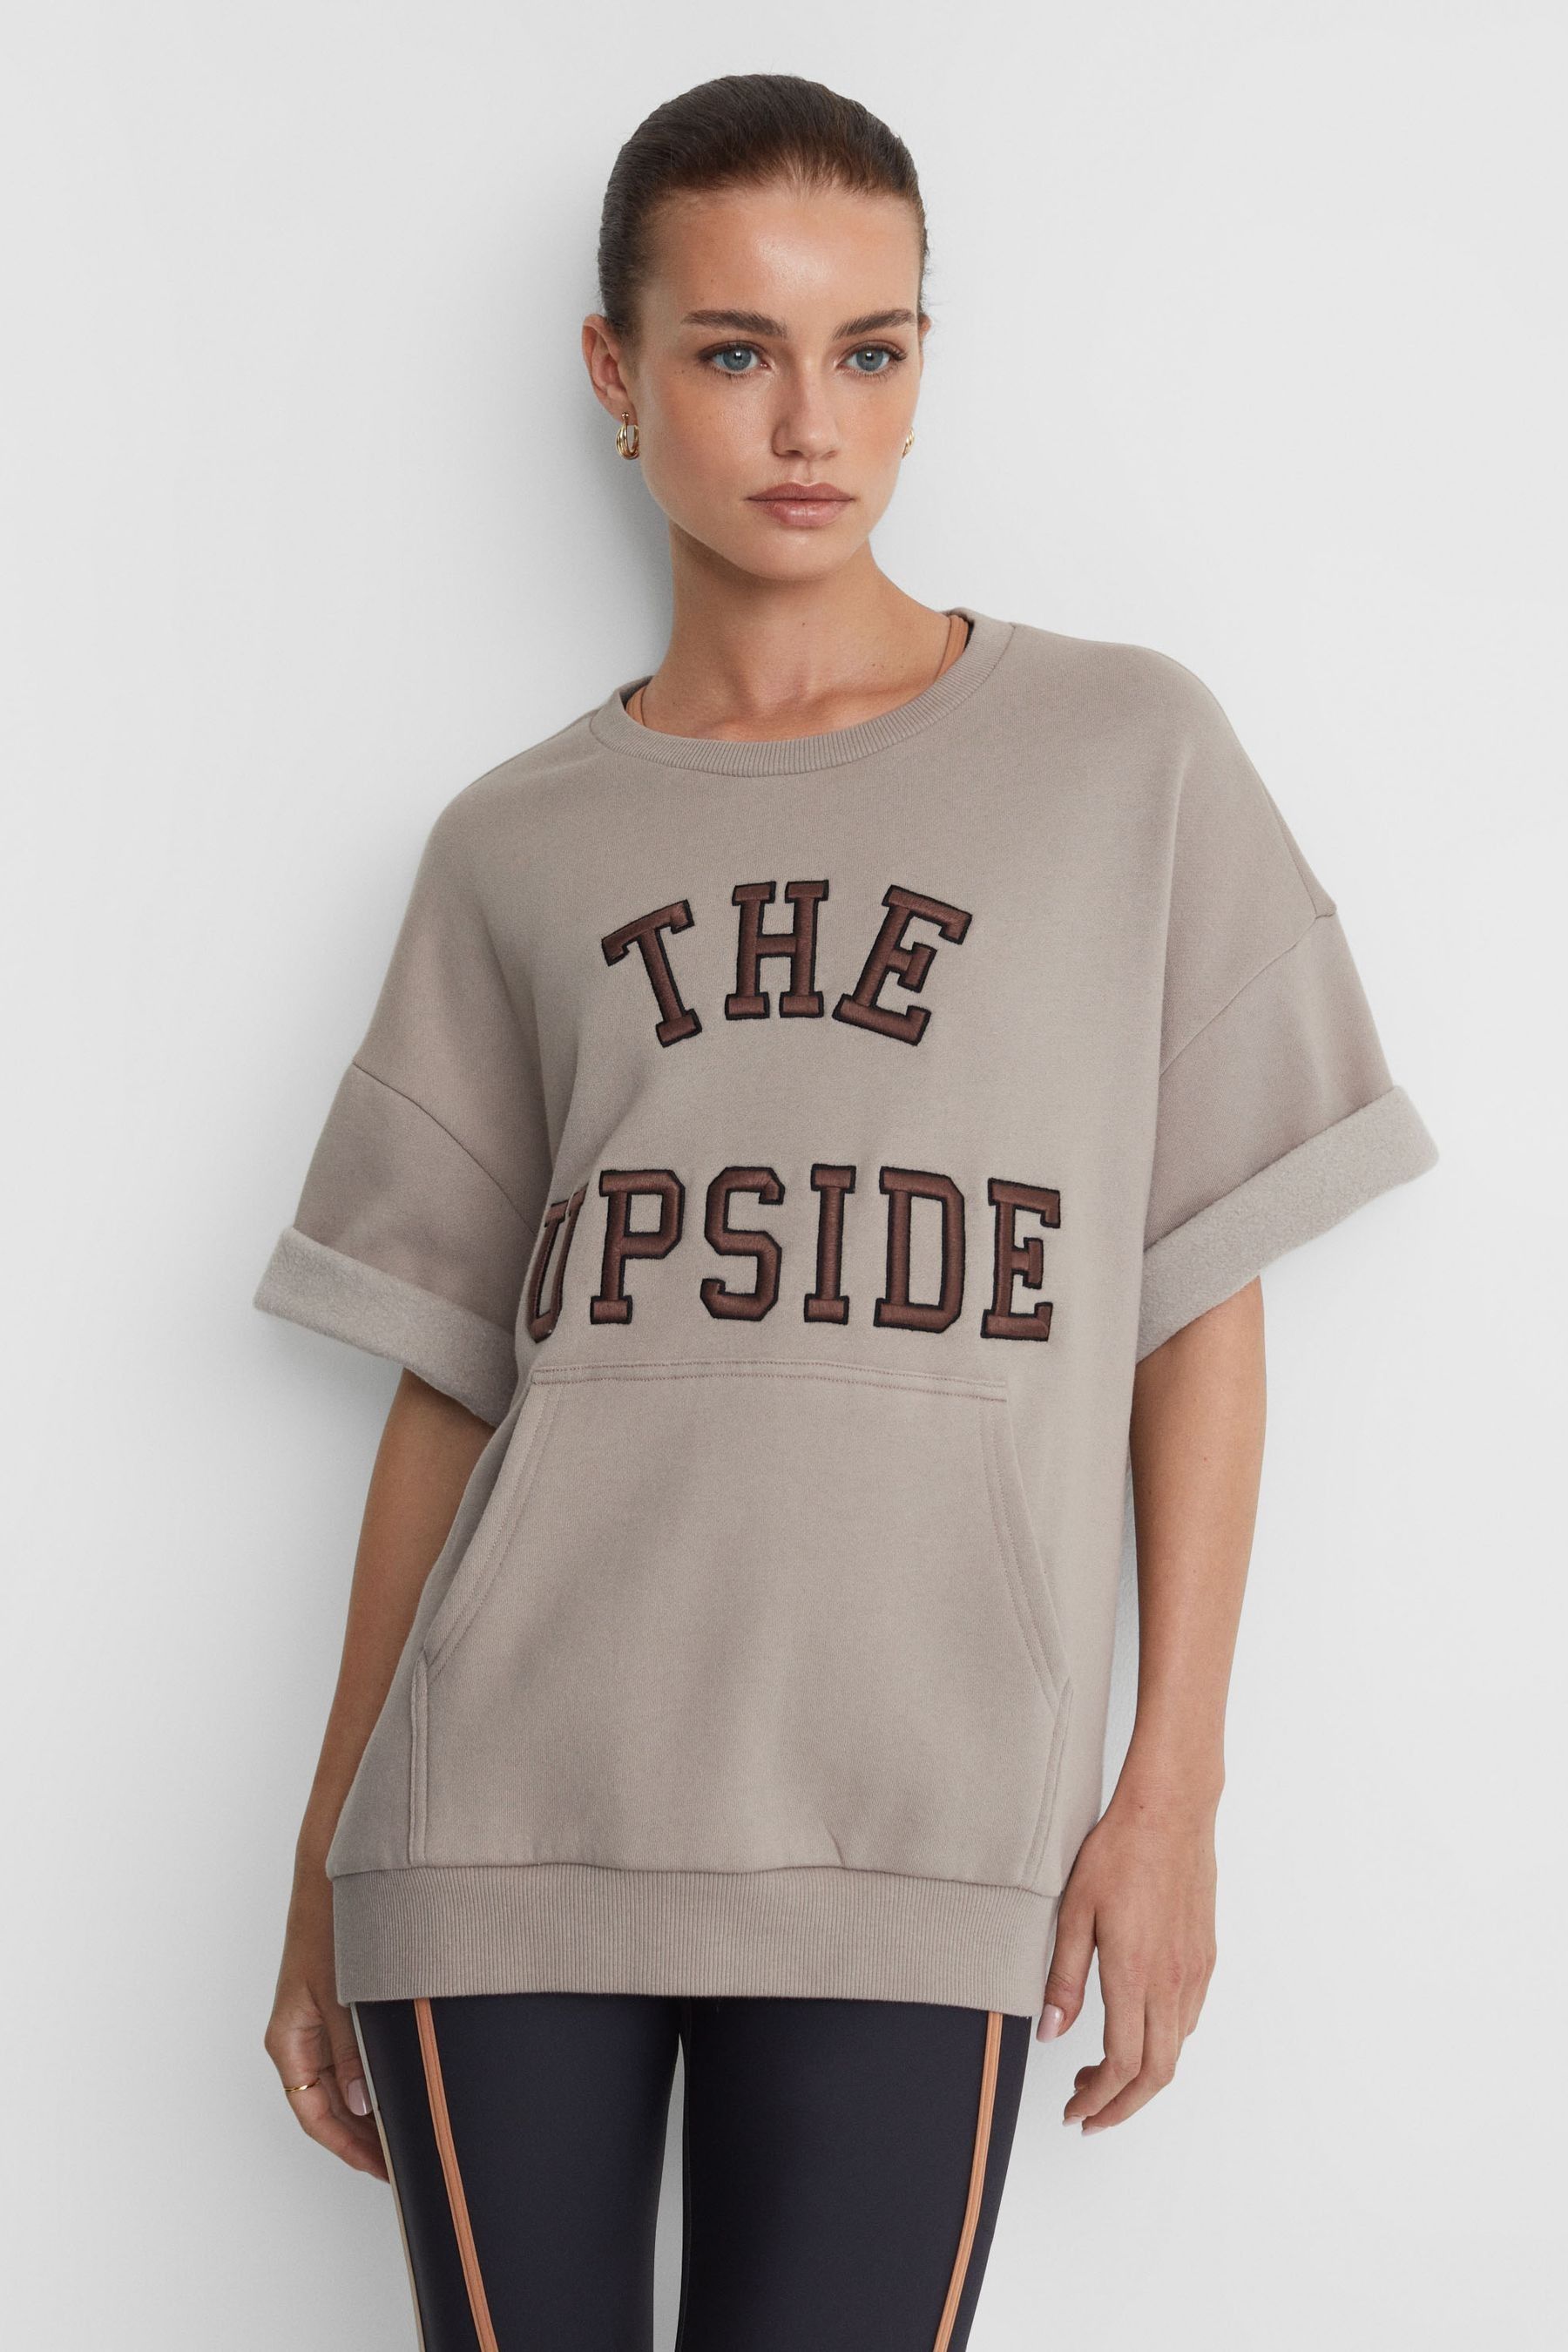 The Upside Cotton Crew Neck T-shirt In Natural